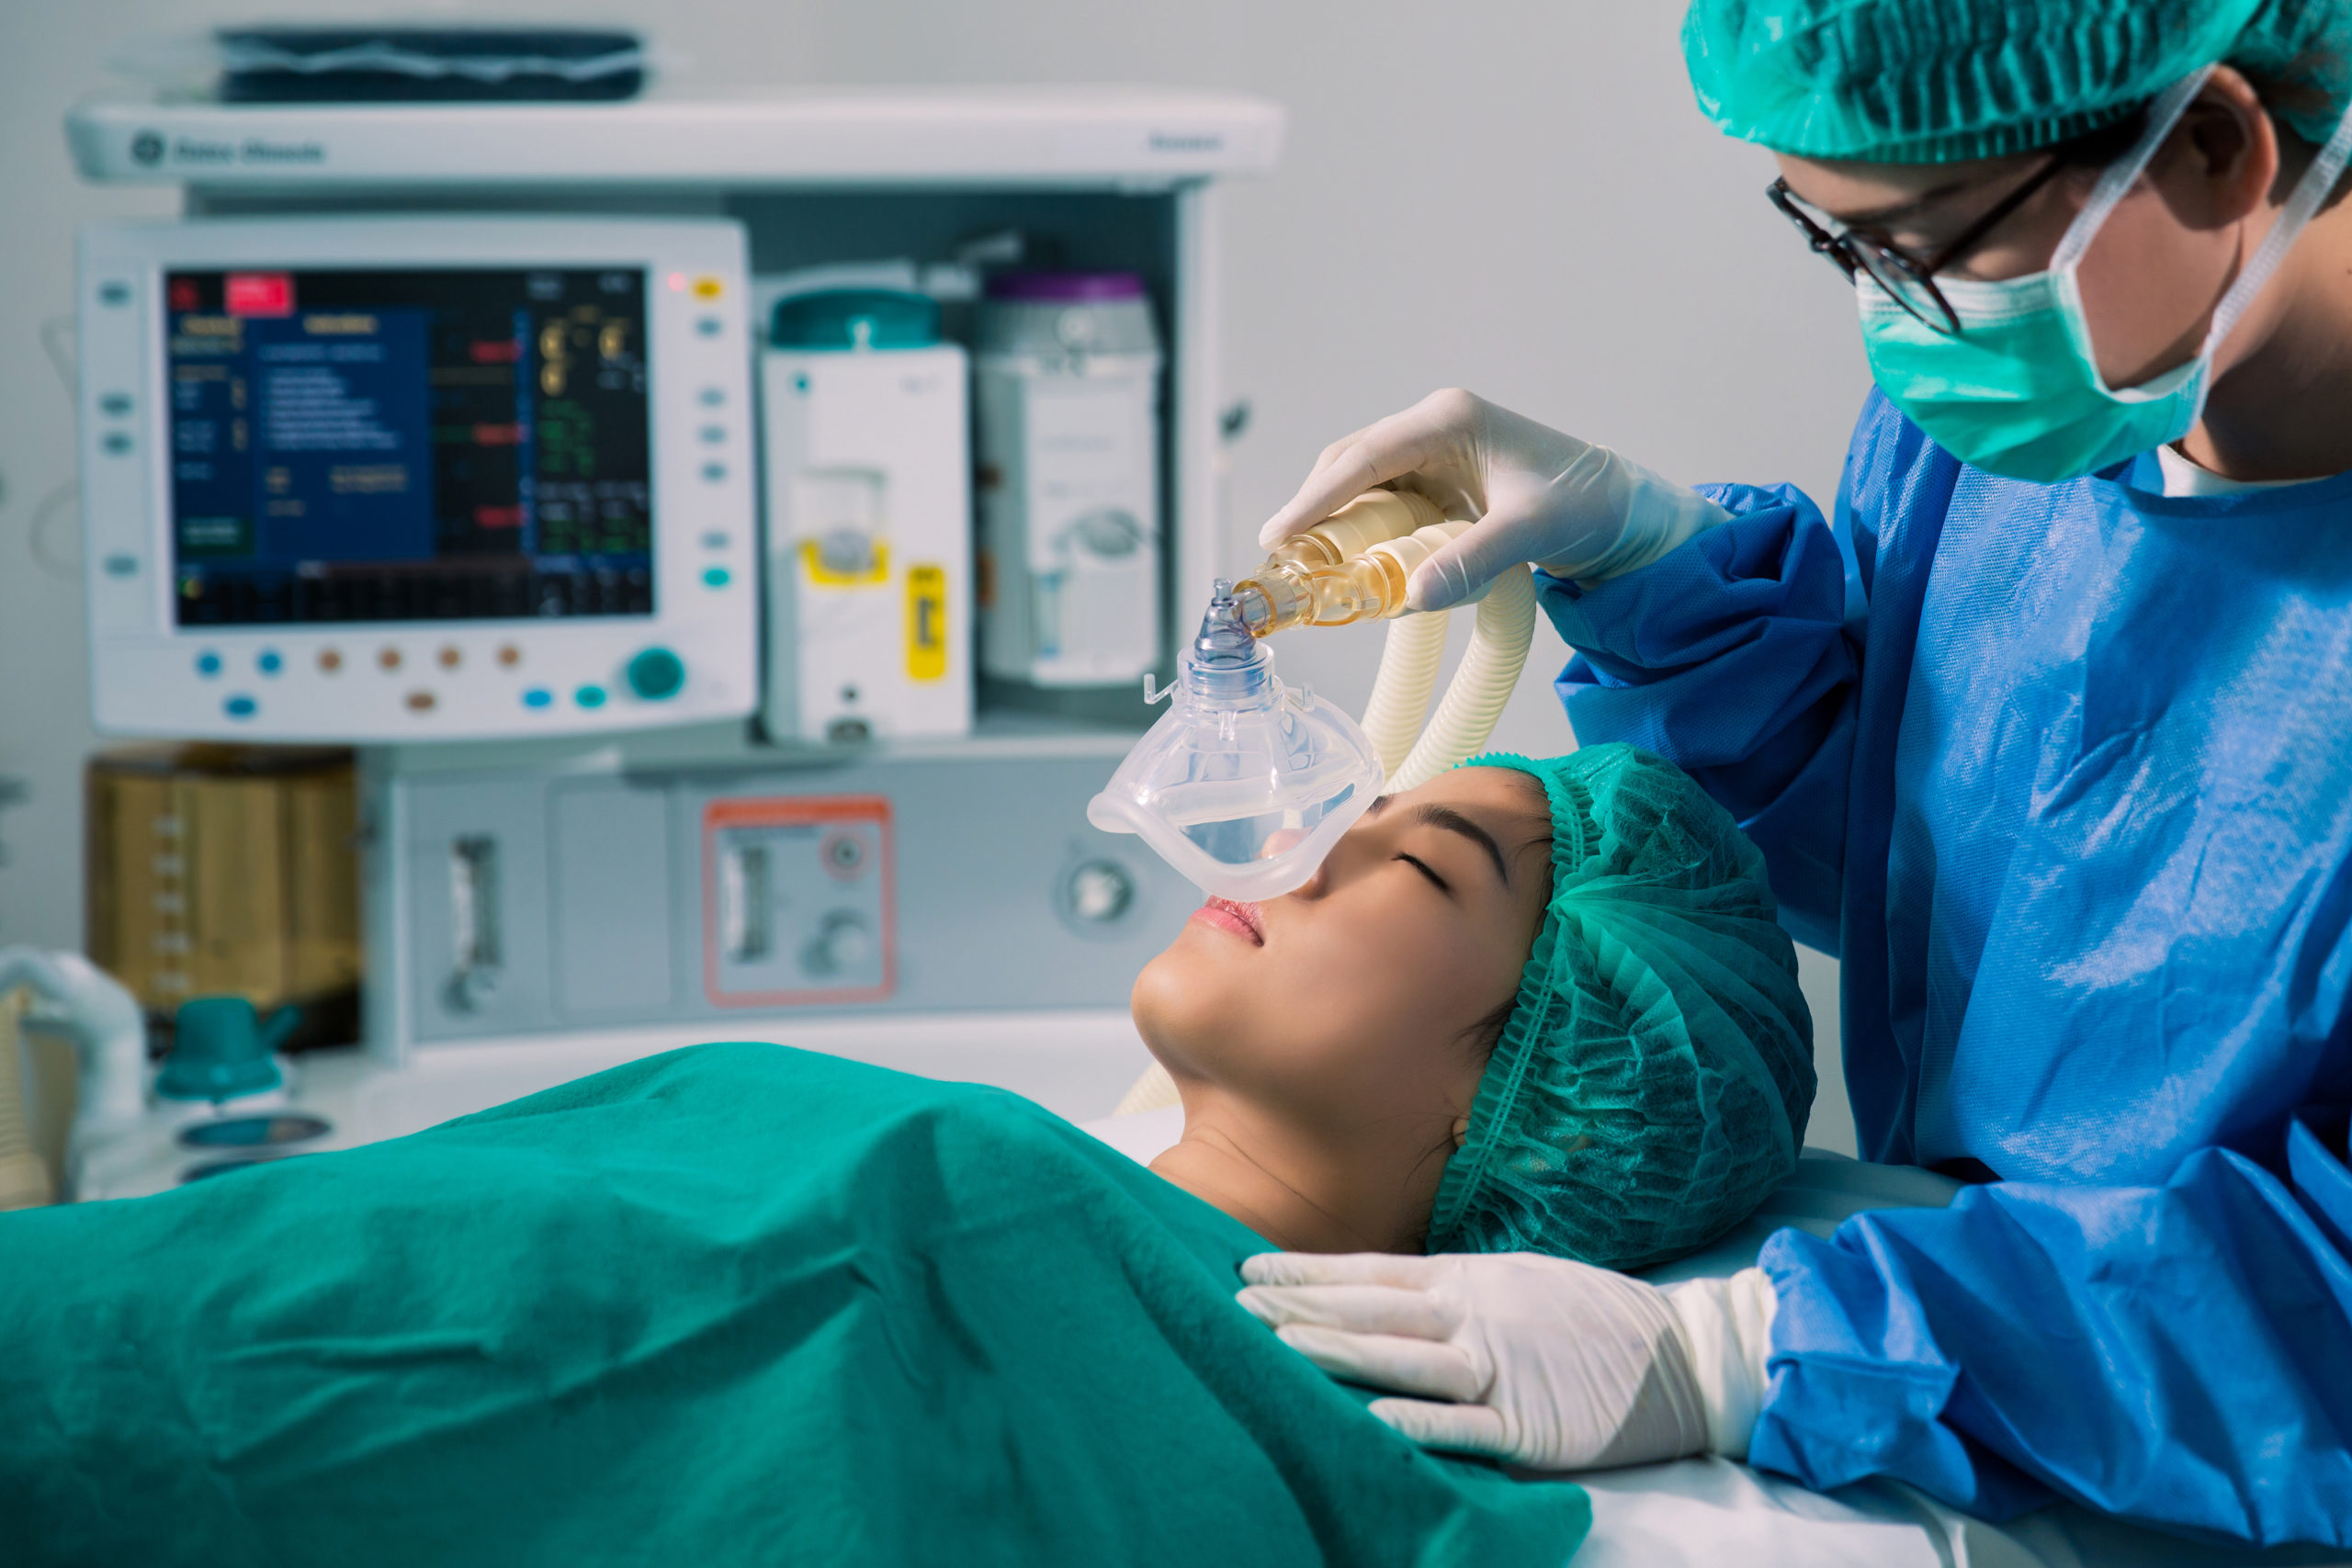 Image of surgeon prepping a patient for surgery in operating room with oxygen mask